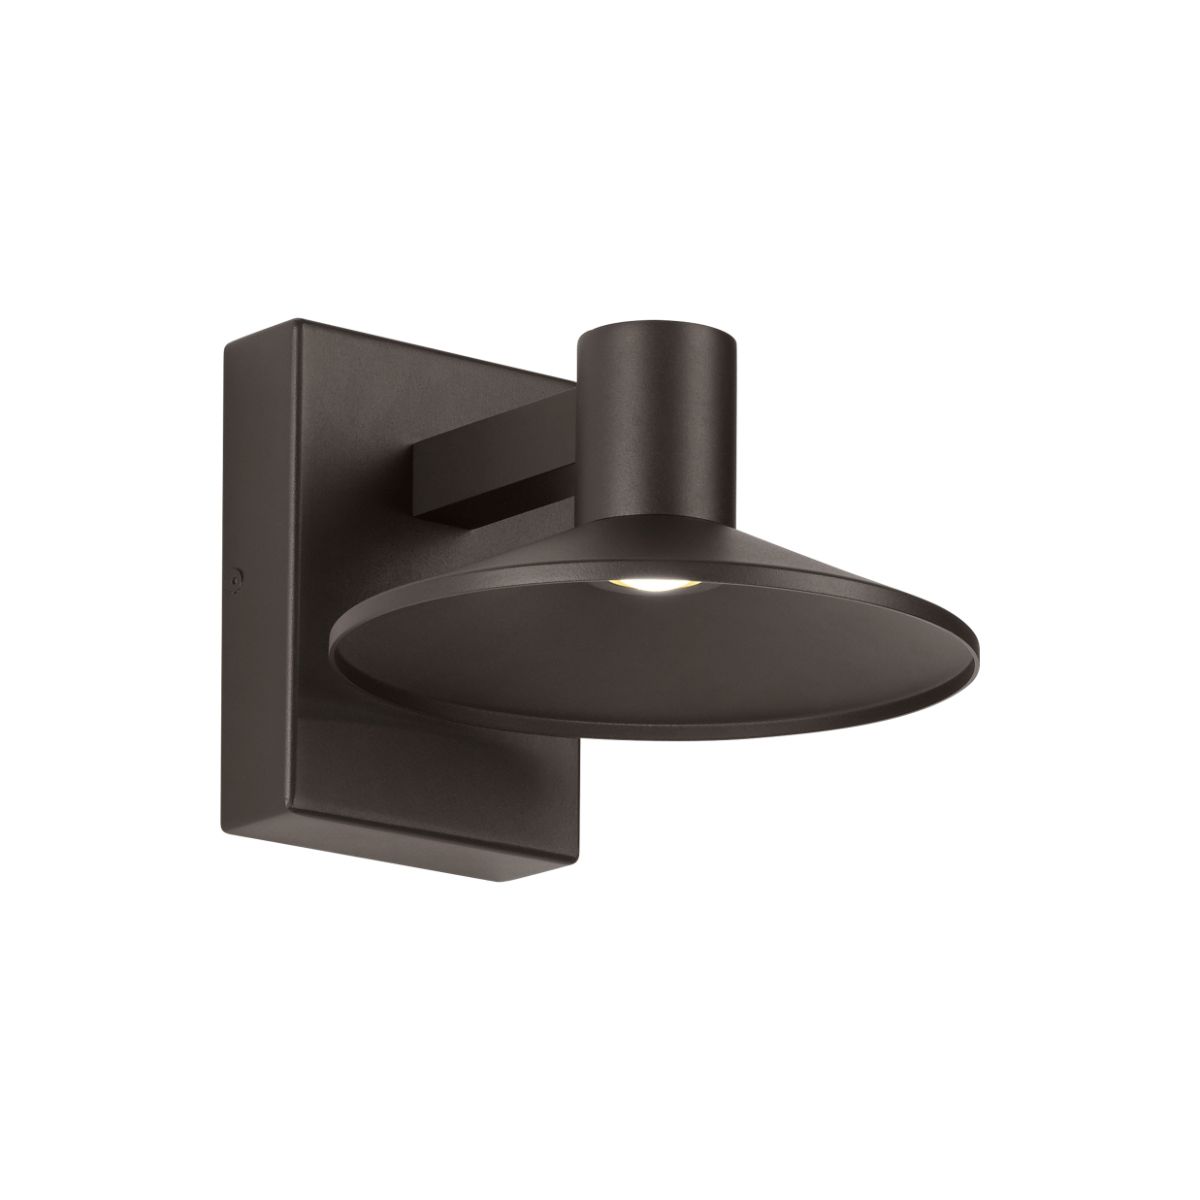 Ash 8 In. LED Hi-Output Outdoor Wall Sconce 1189 Lumens 2700K